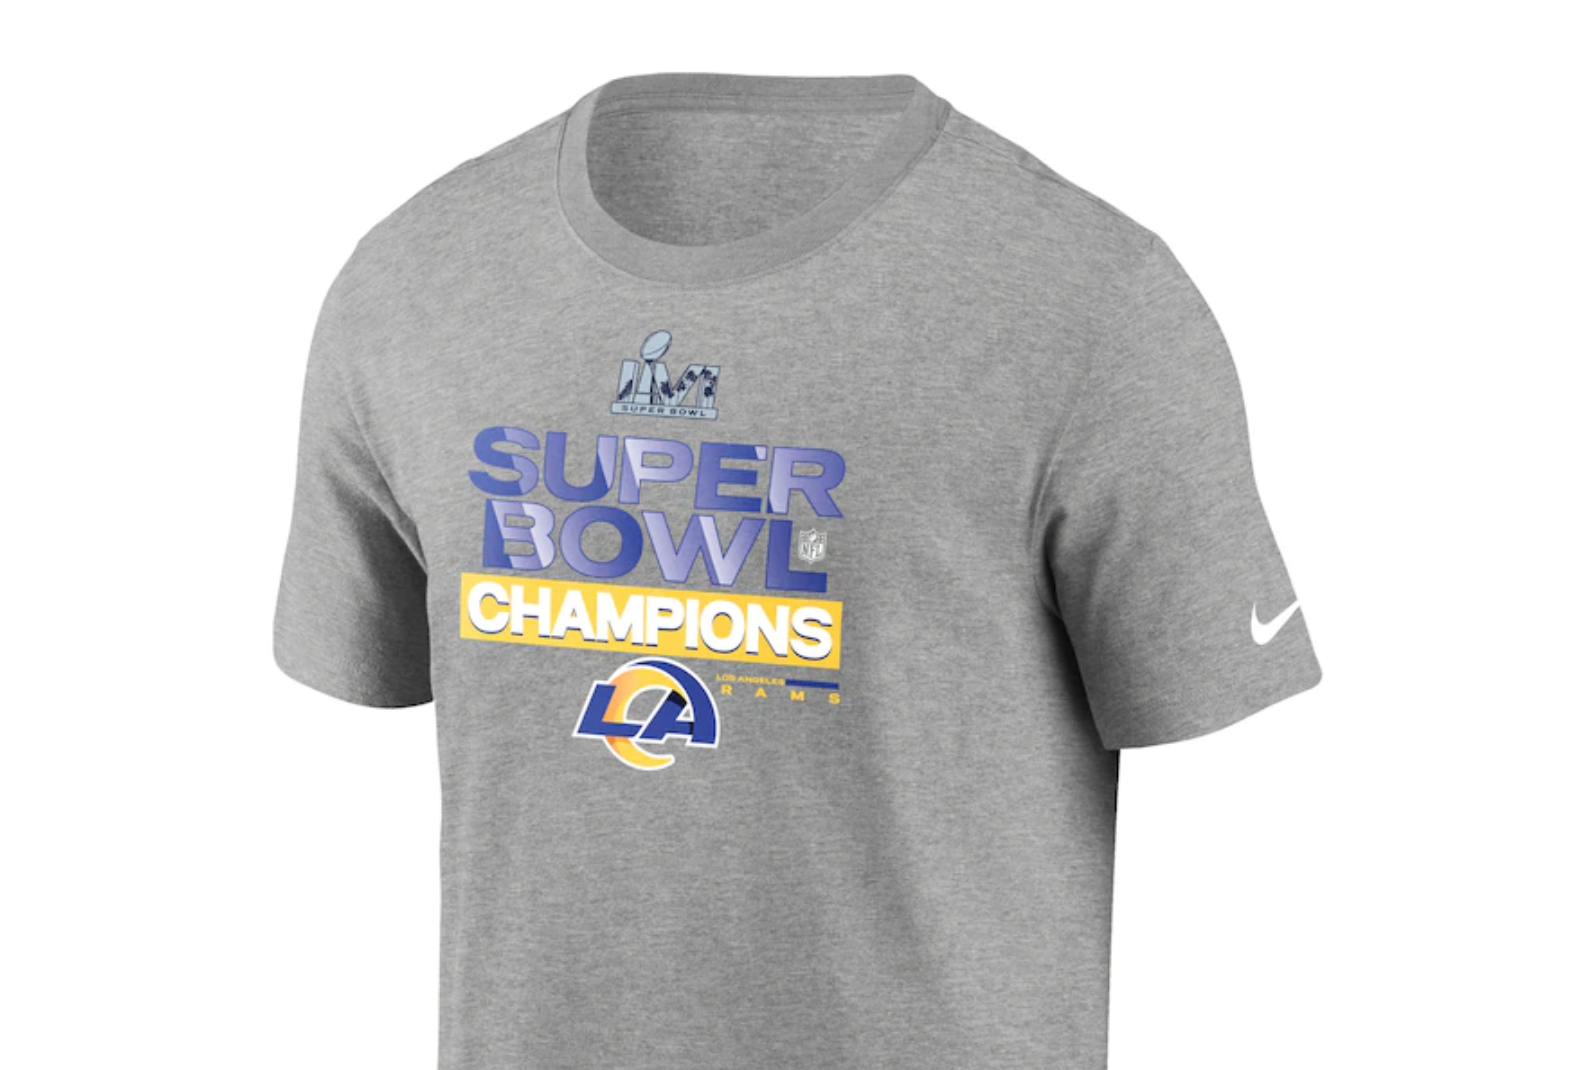 Los Angeles Rams Super Bowl Champions shirts, hats, jerseys, accessories:  Where to get merchandise 